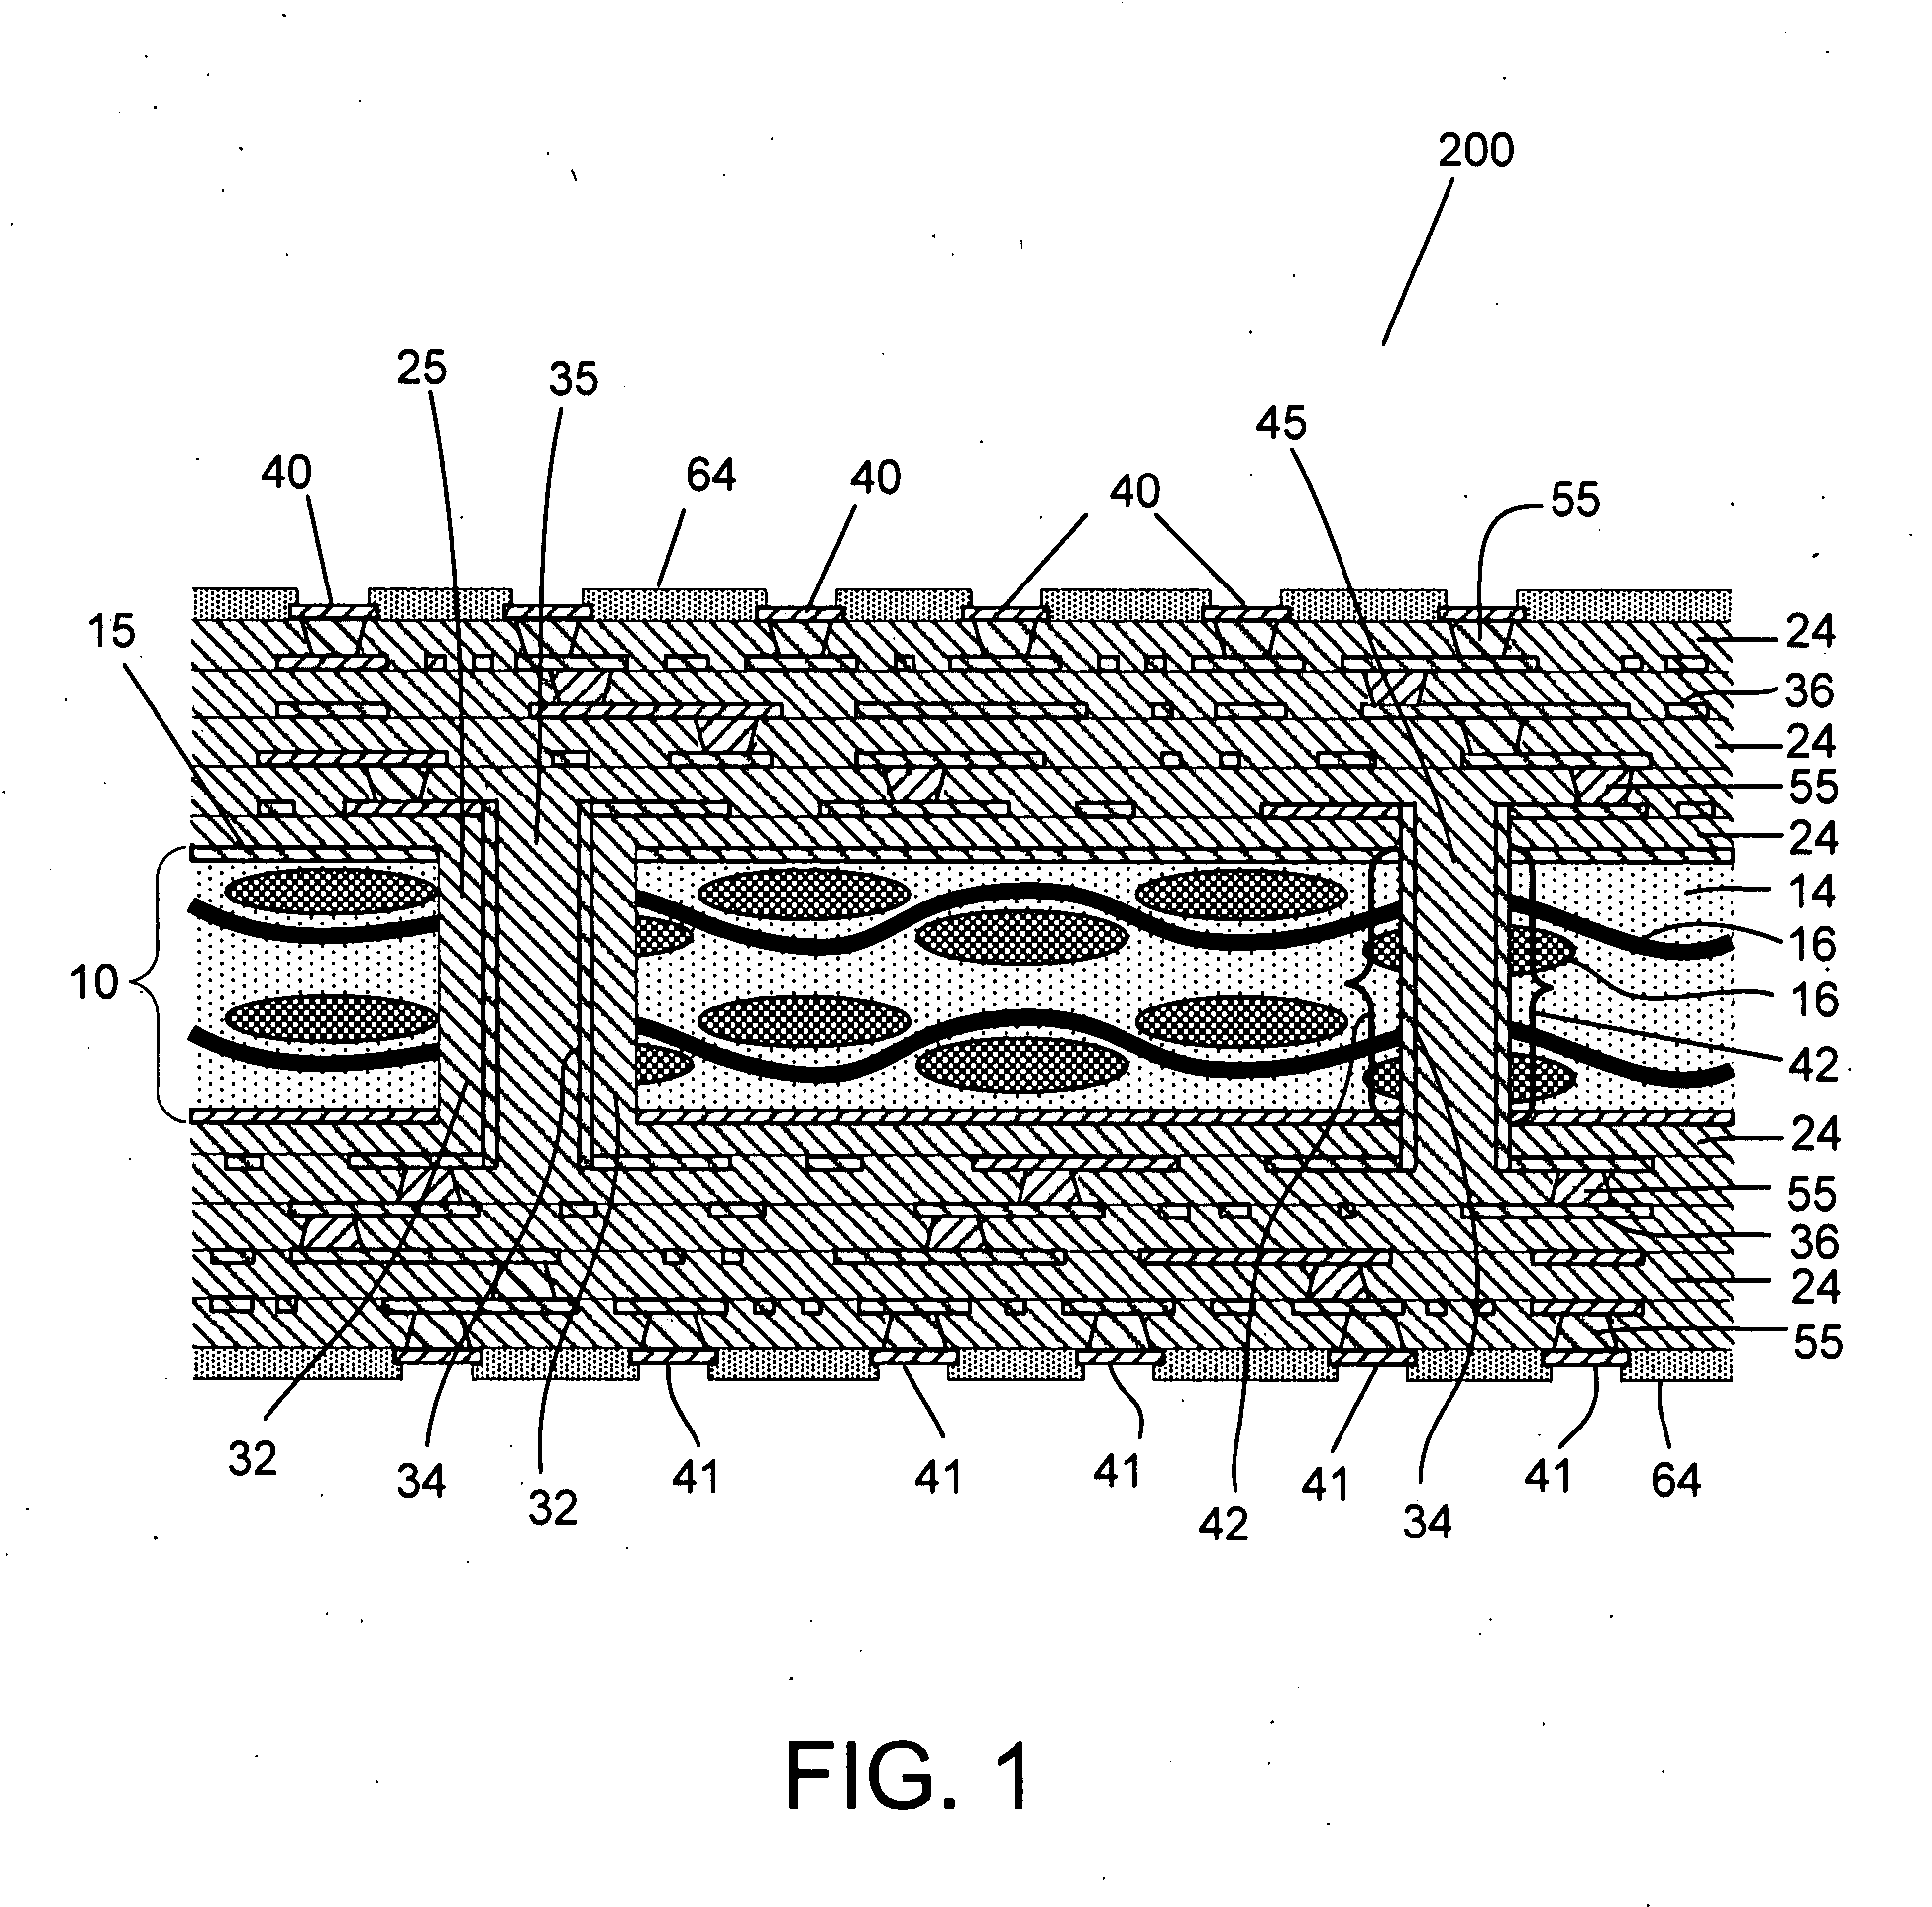 Build-up printed wiring board substrate having a core layer that is part of a circuit